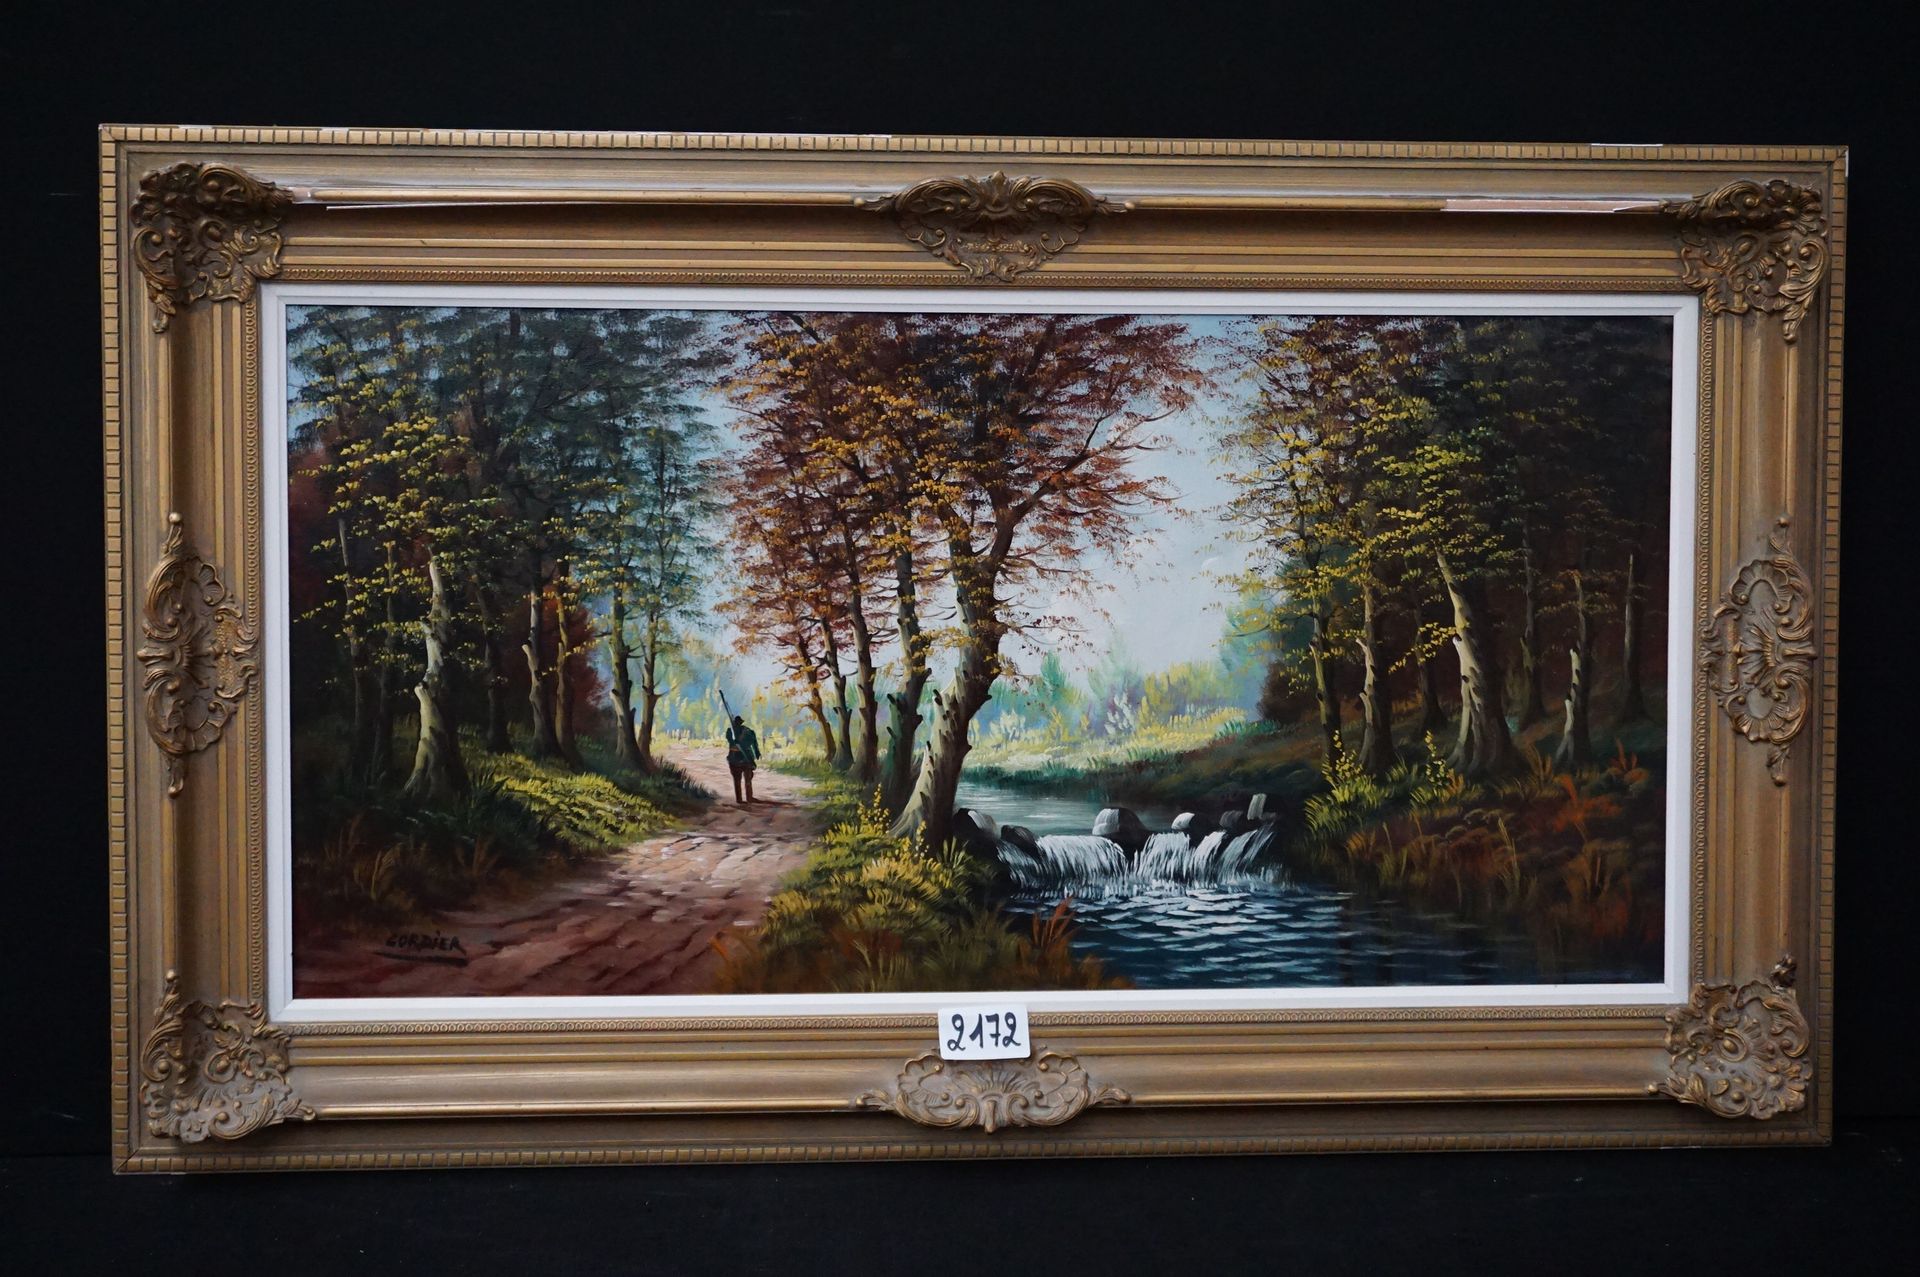 CORDIER "Hunter in the woods" - Oil on canvas - Signed - 50 x 100 cm